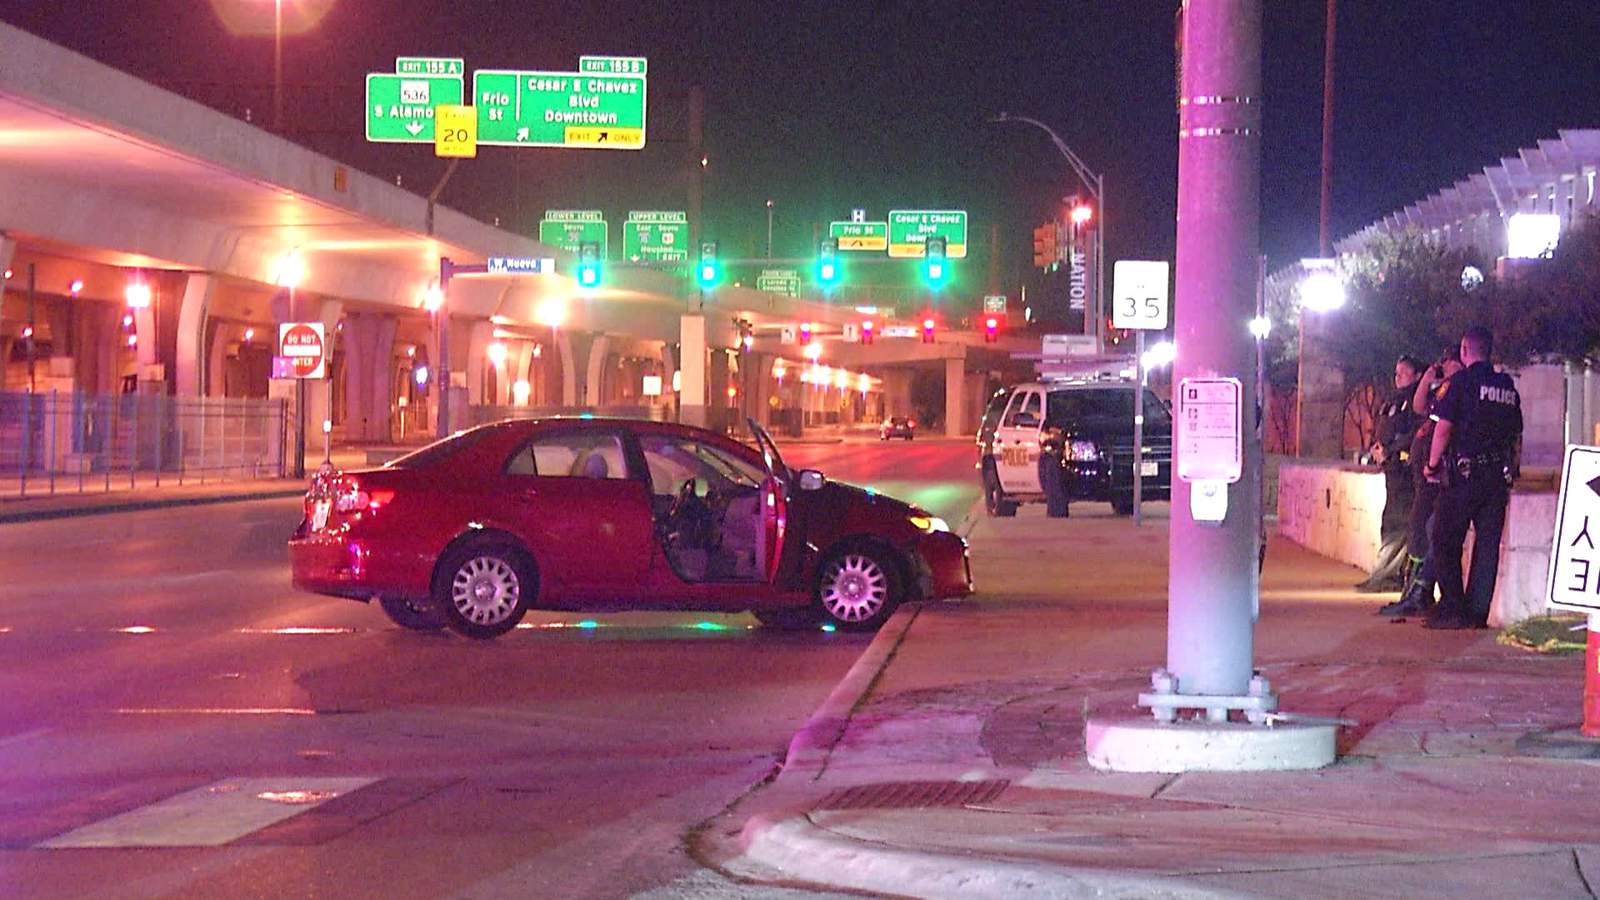 Police officer injured in downtown vehicle crash with sedan